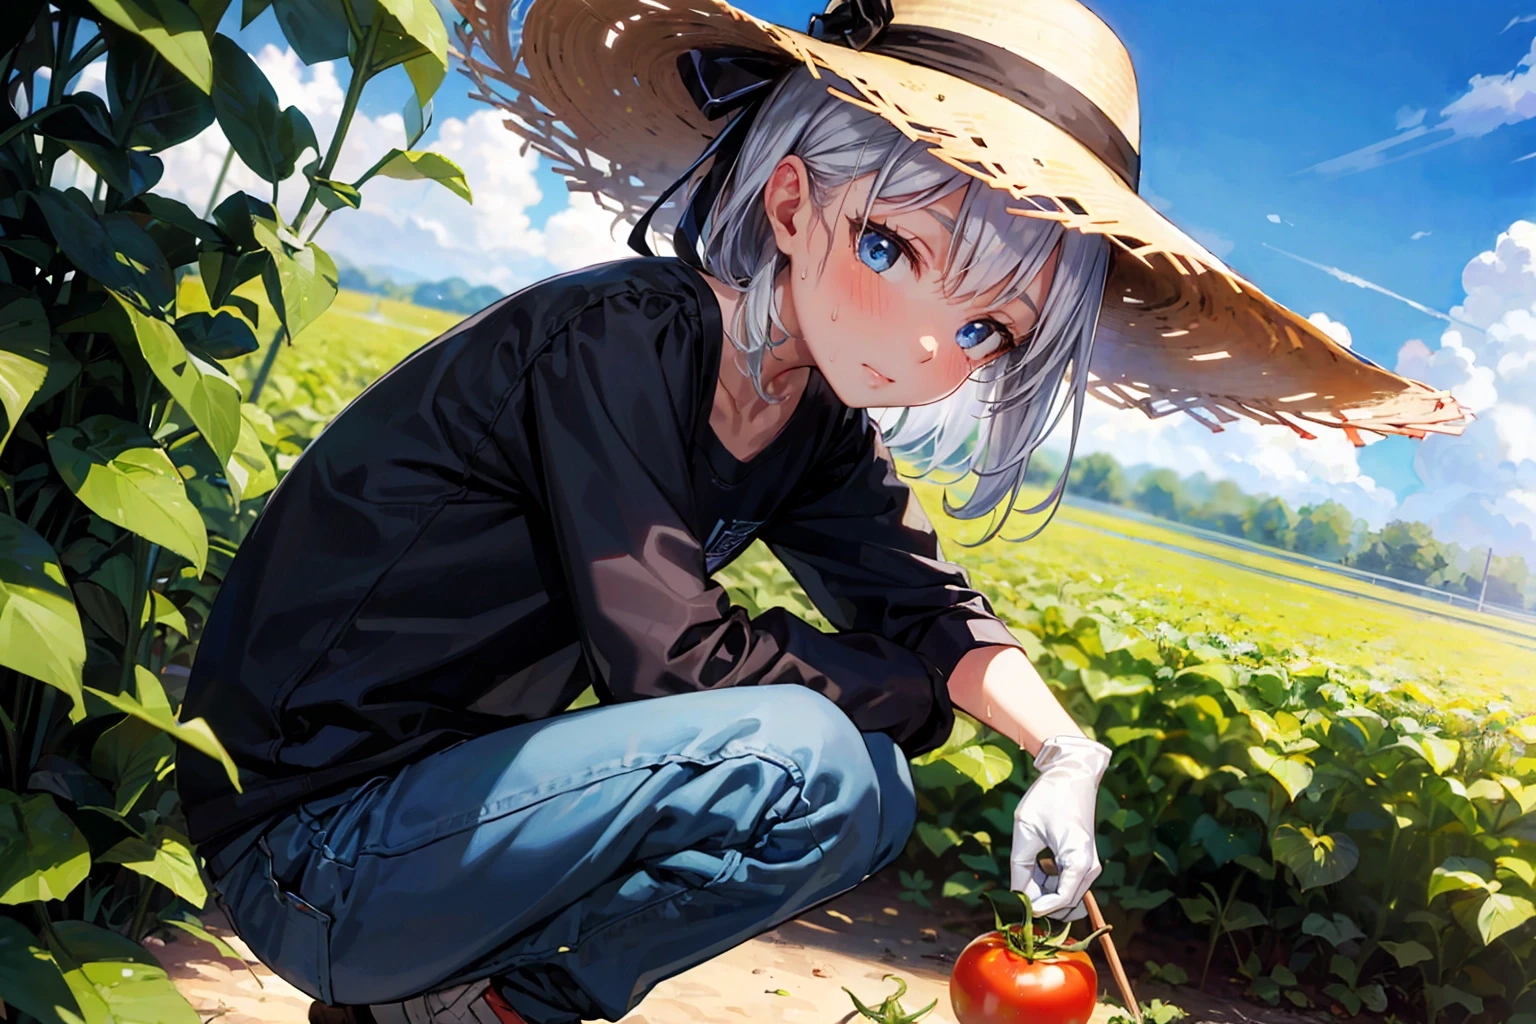 straw-hat -anime-style-all-ages-46